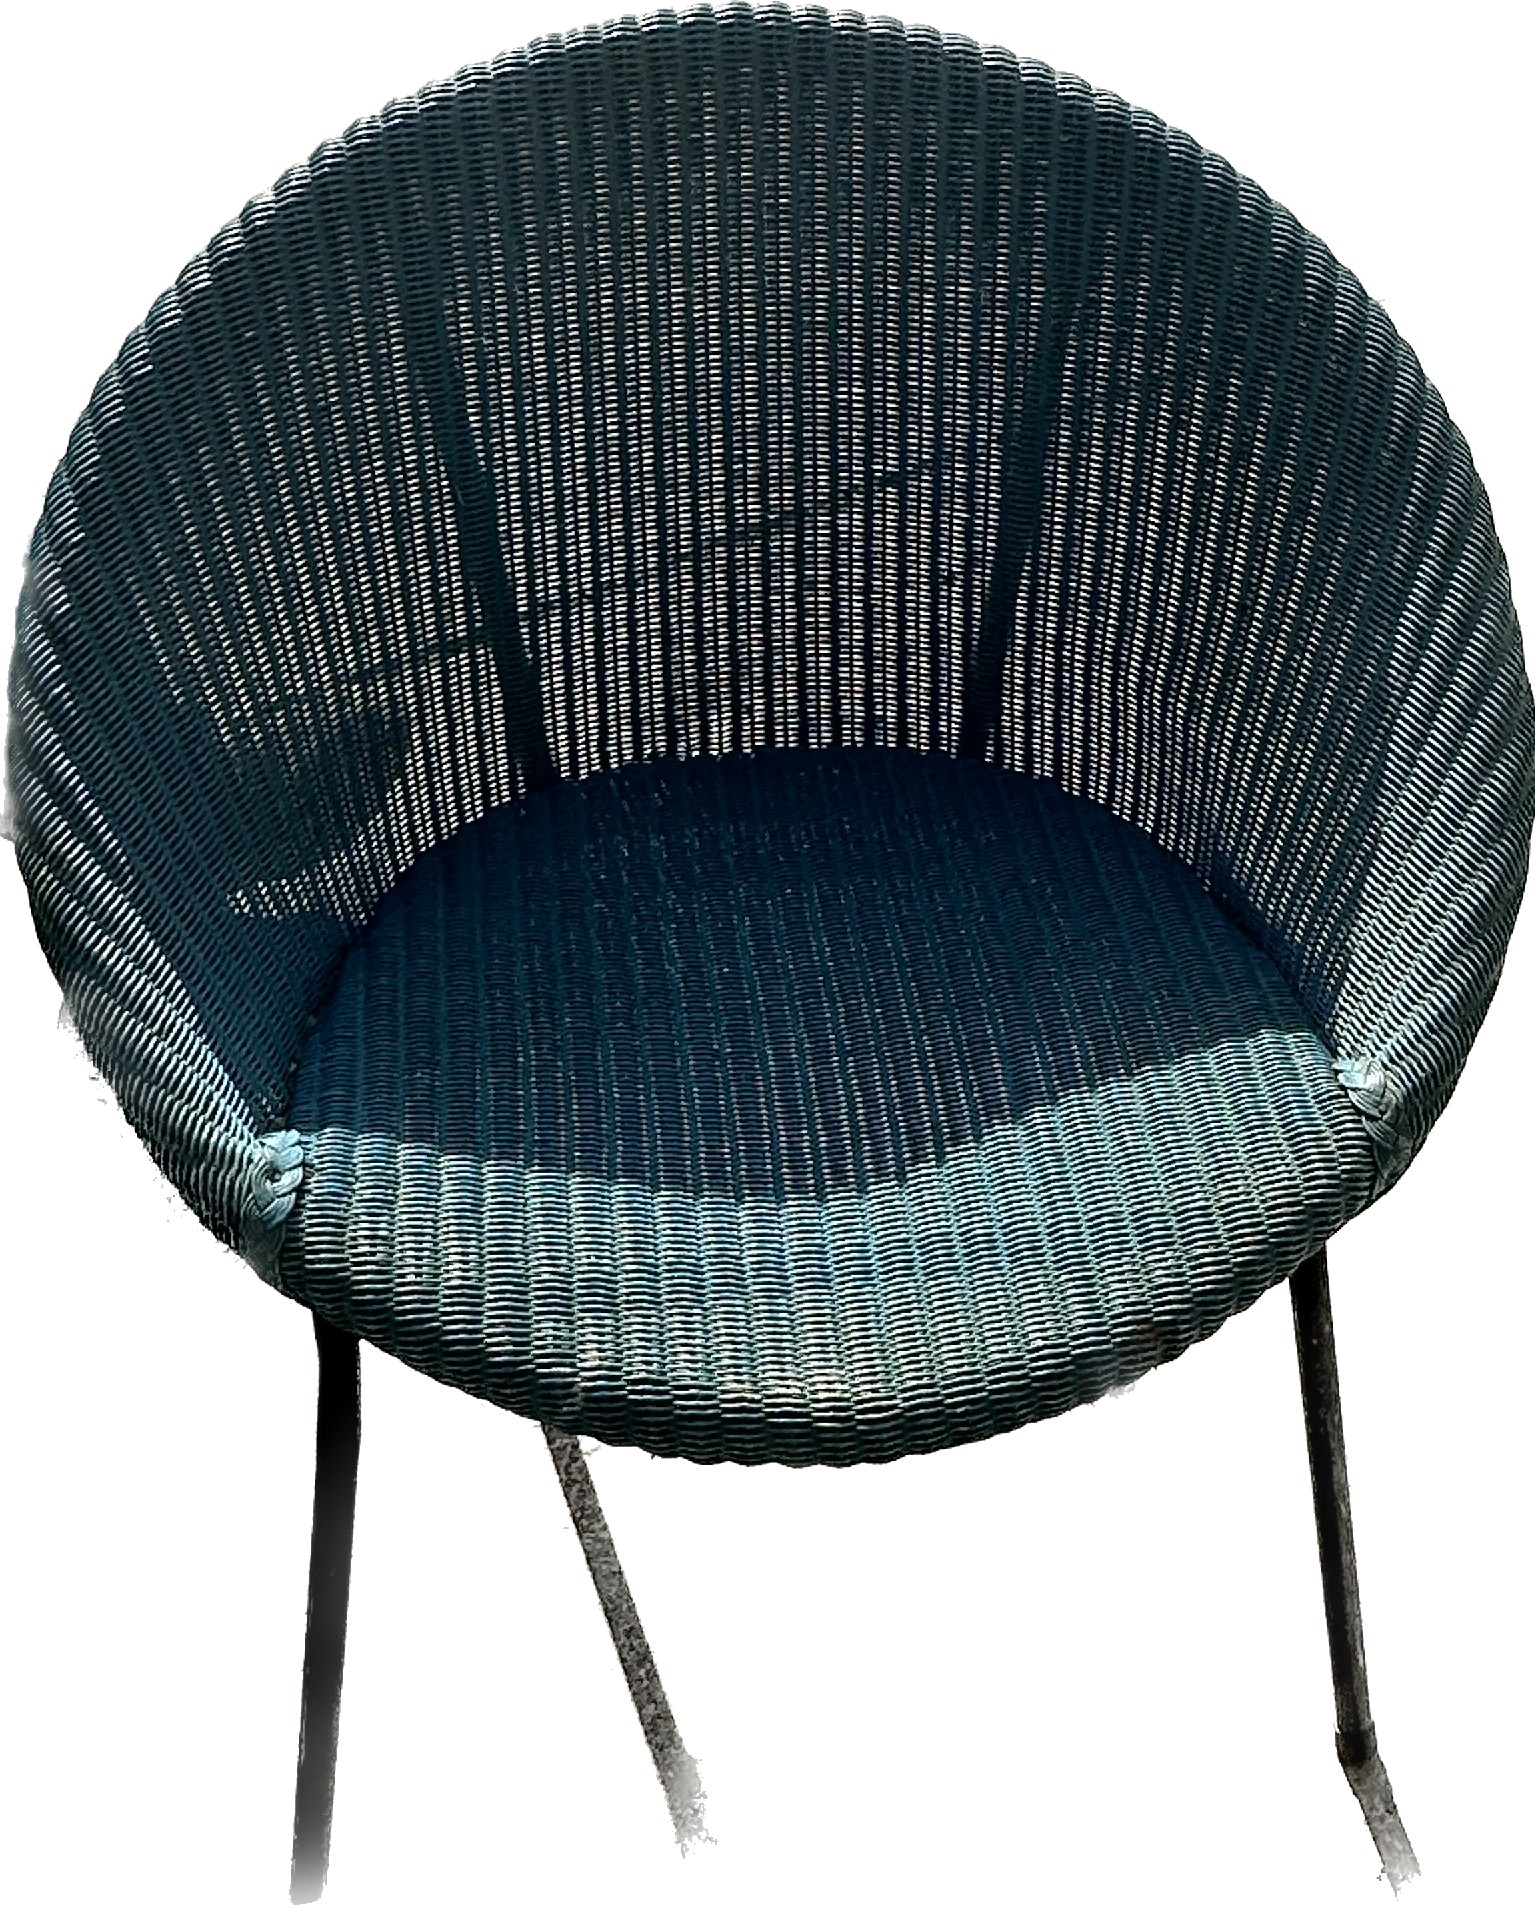 1950's/60's Llyold loom chair ' Lusty' - Image 2 of 3